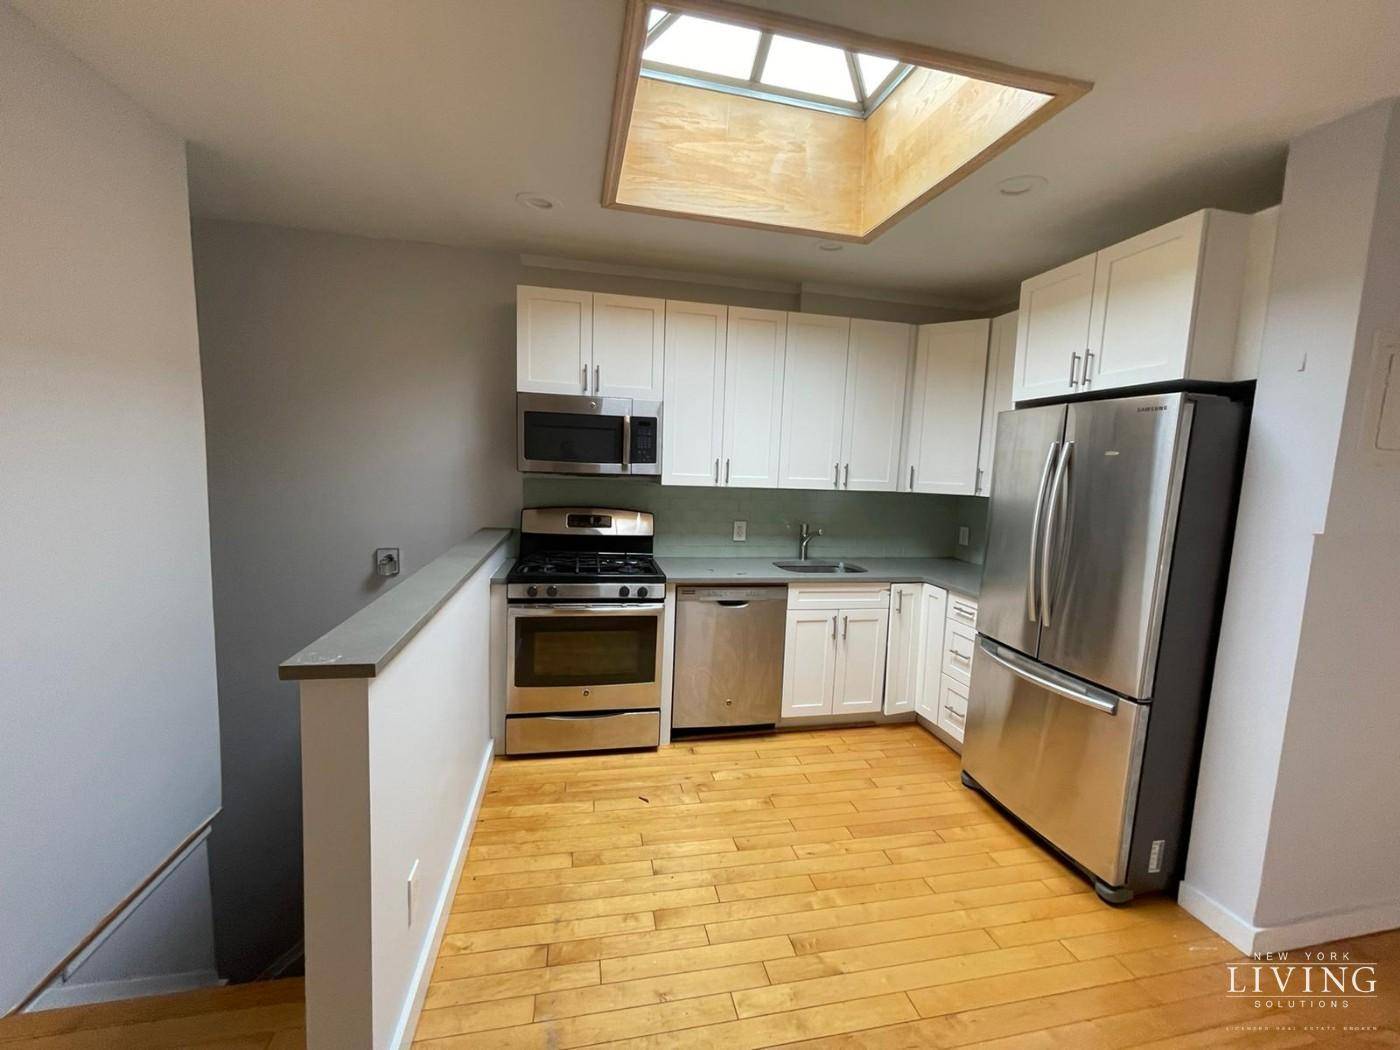 BEAUTIFUL NEWLY RENOVATED 4 BEDROOM APARTMENT IN PRIME BUSHWICK !